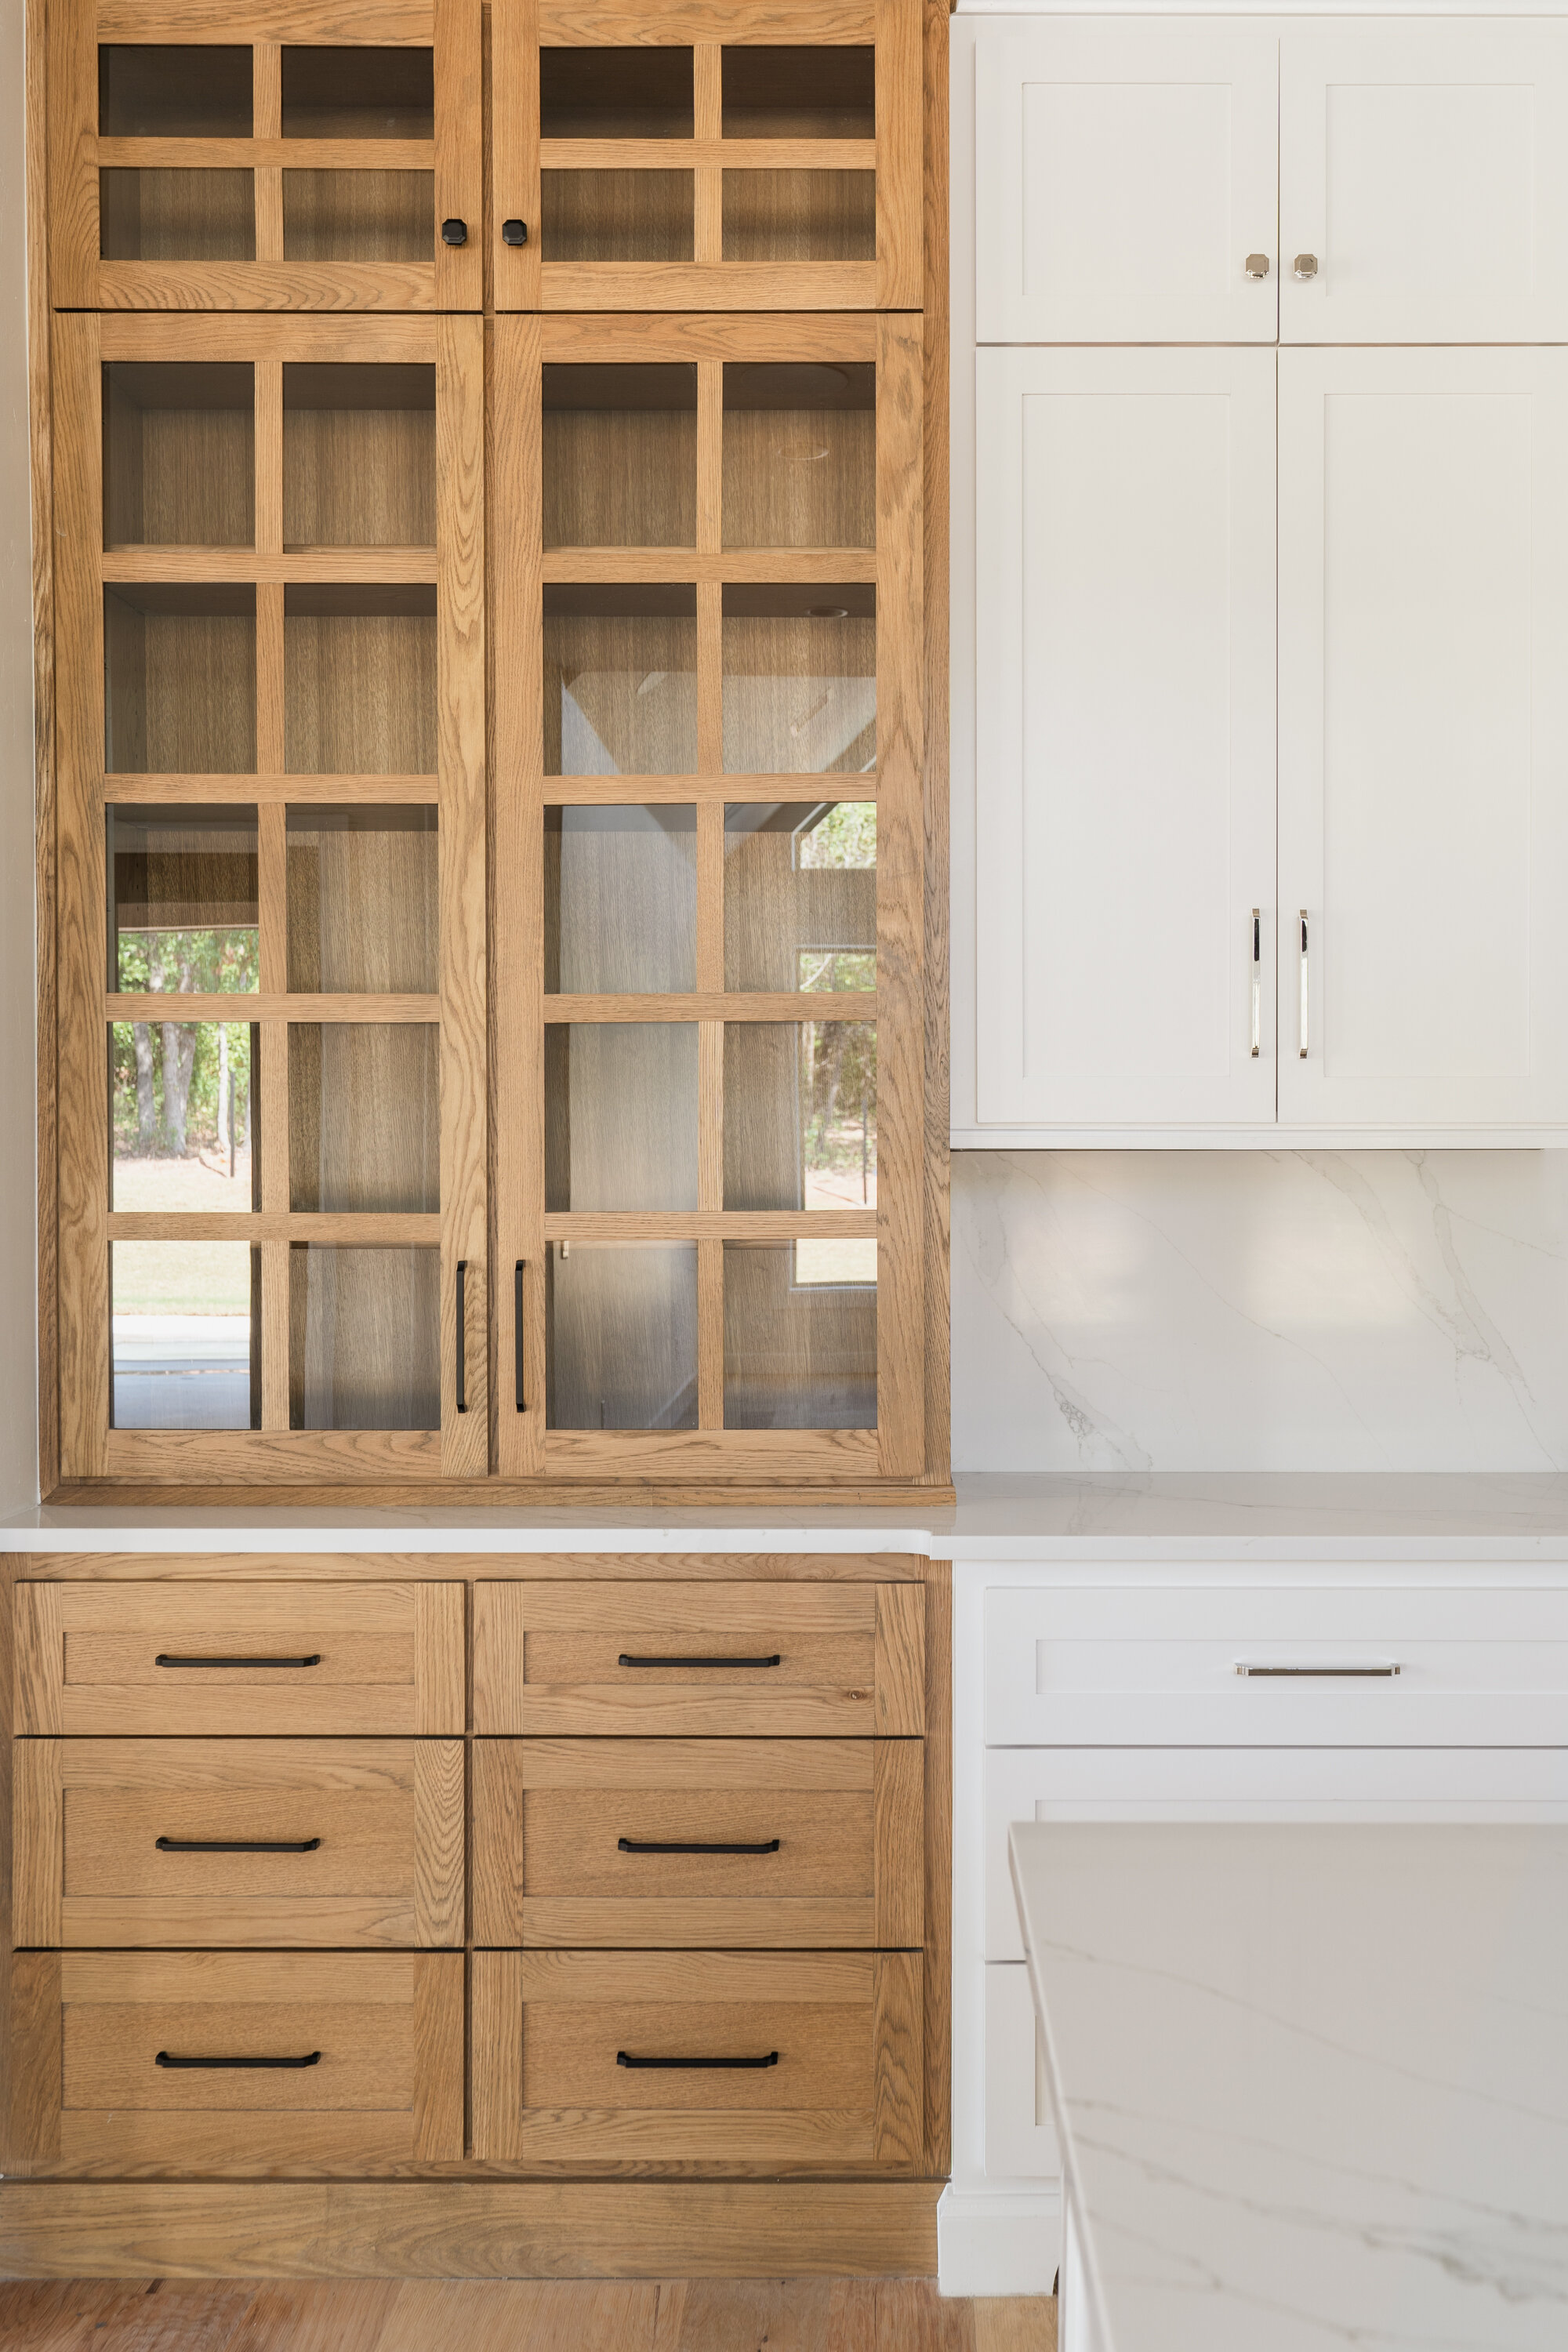 Natural wood stain cabinets